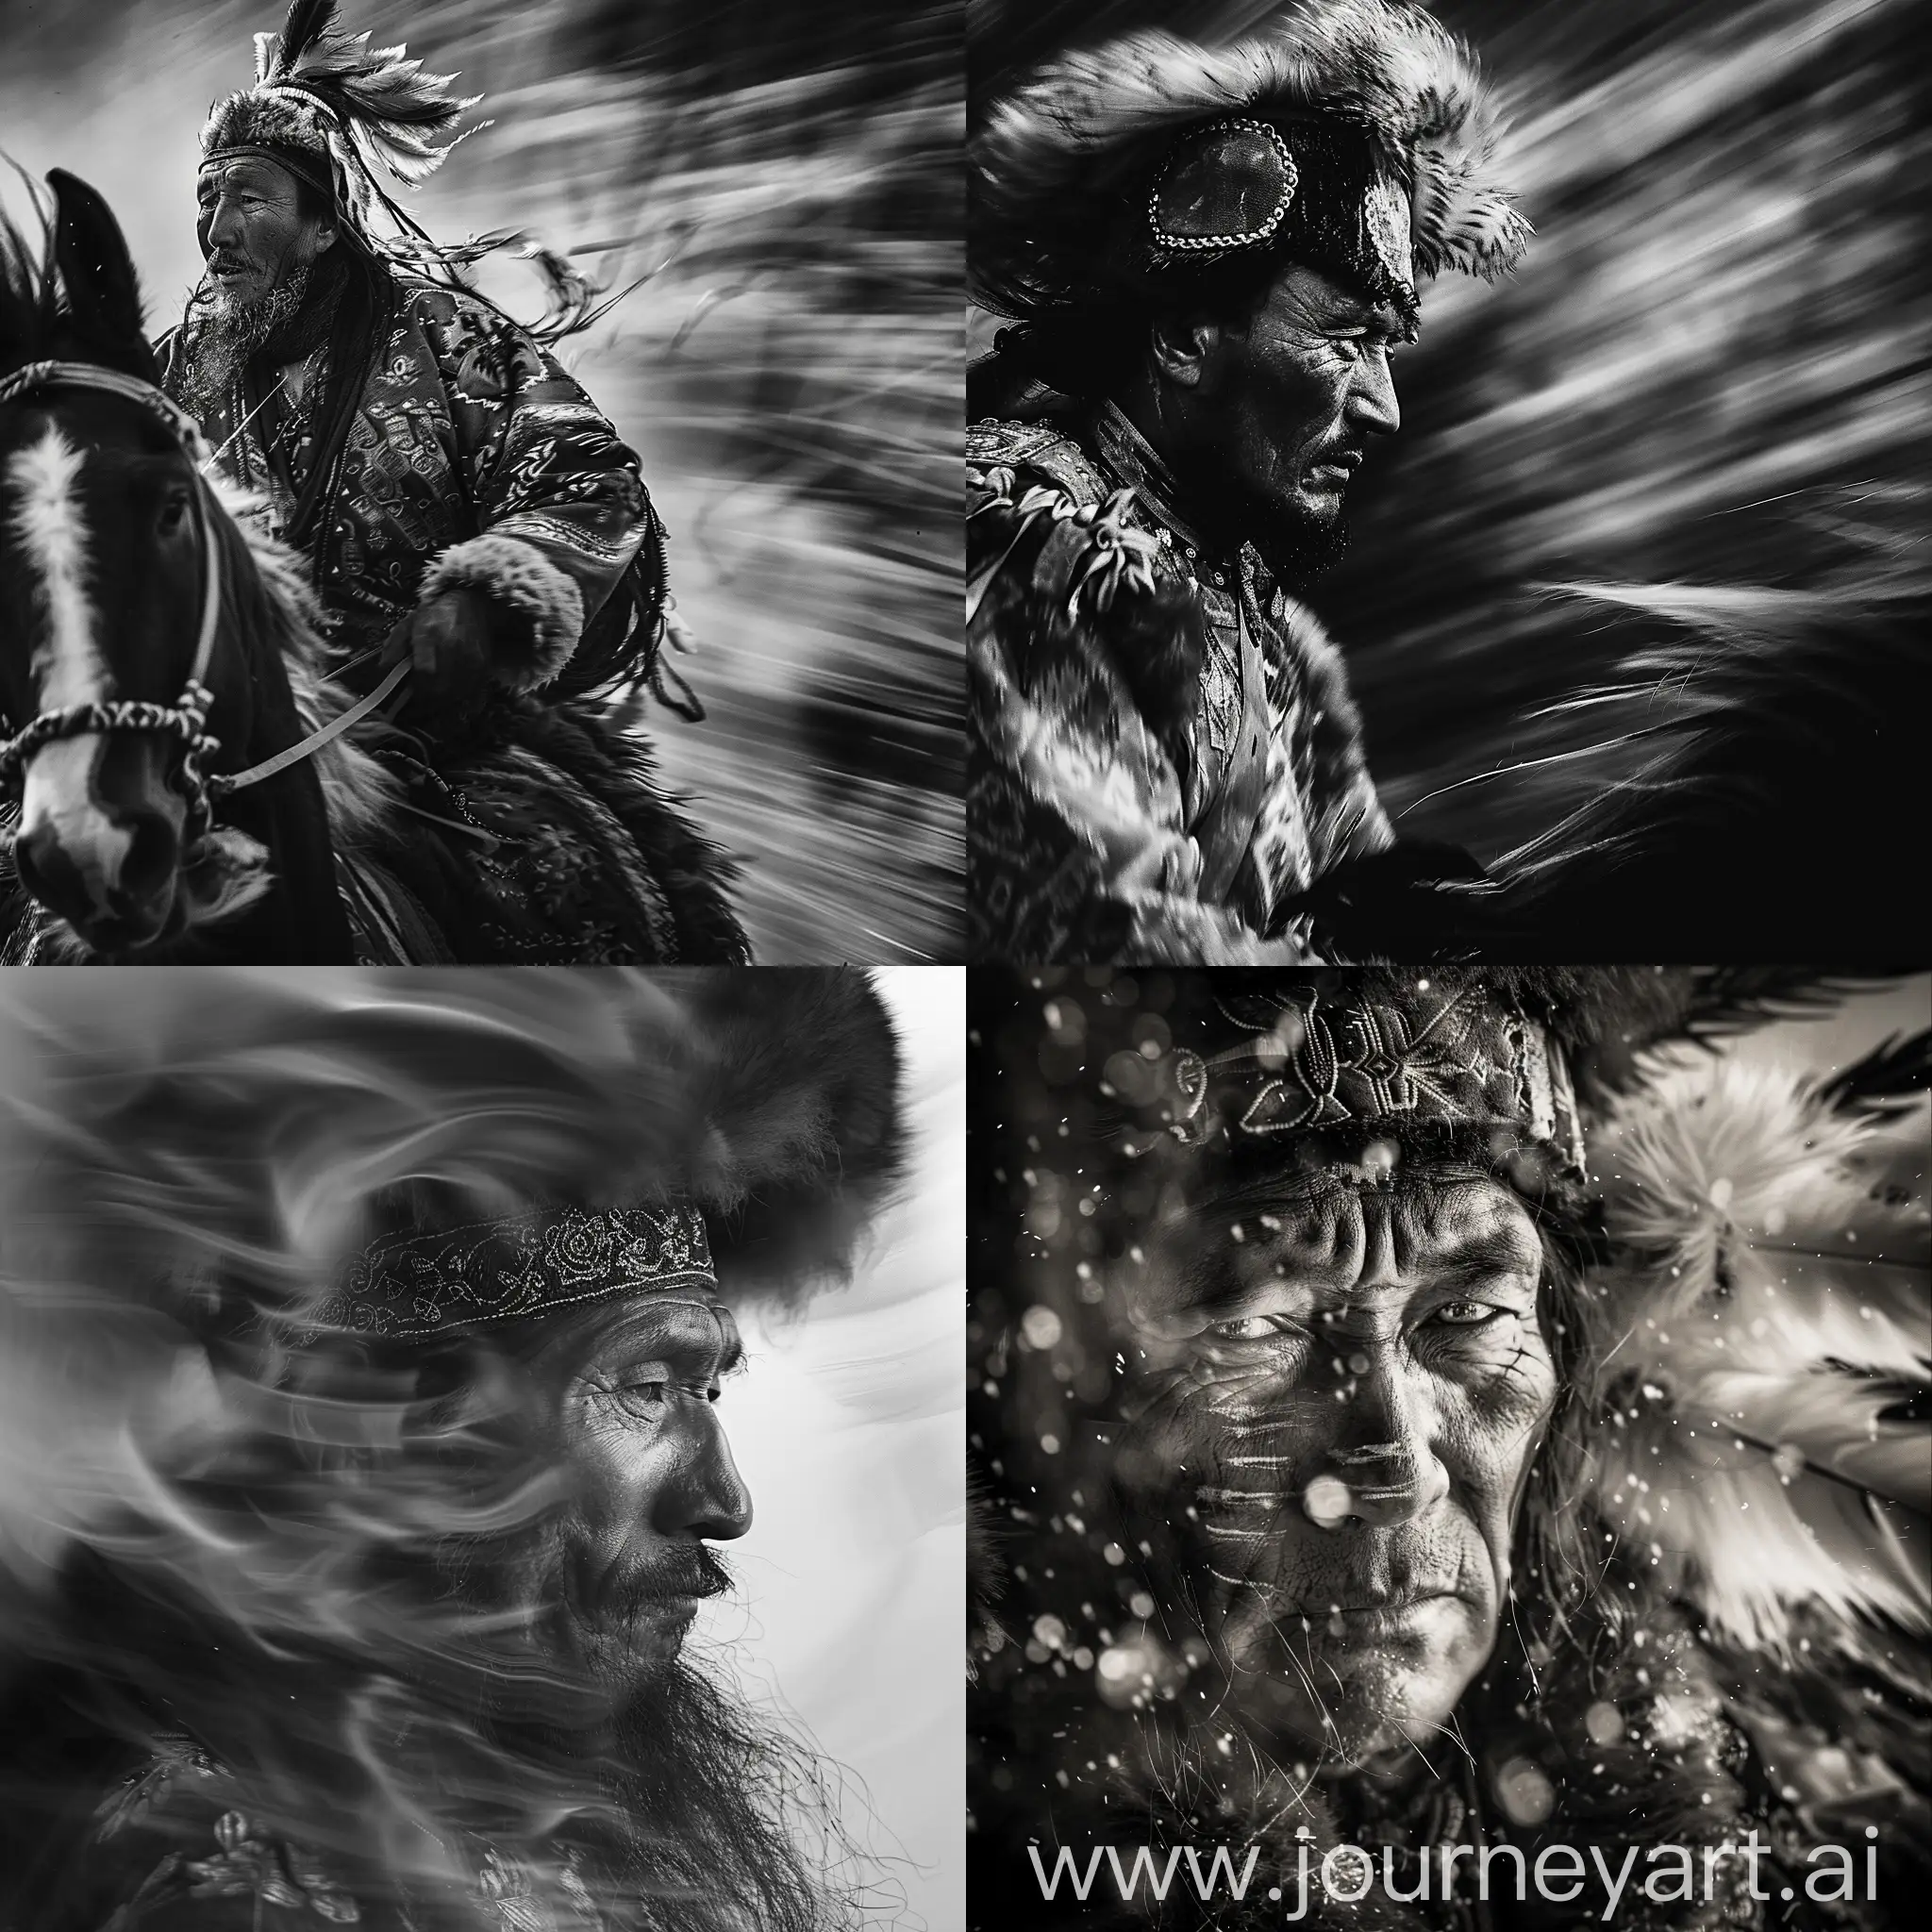 Kazakh warrior black and white image, in the style of blurry details, ethereal minimalism